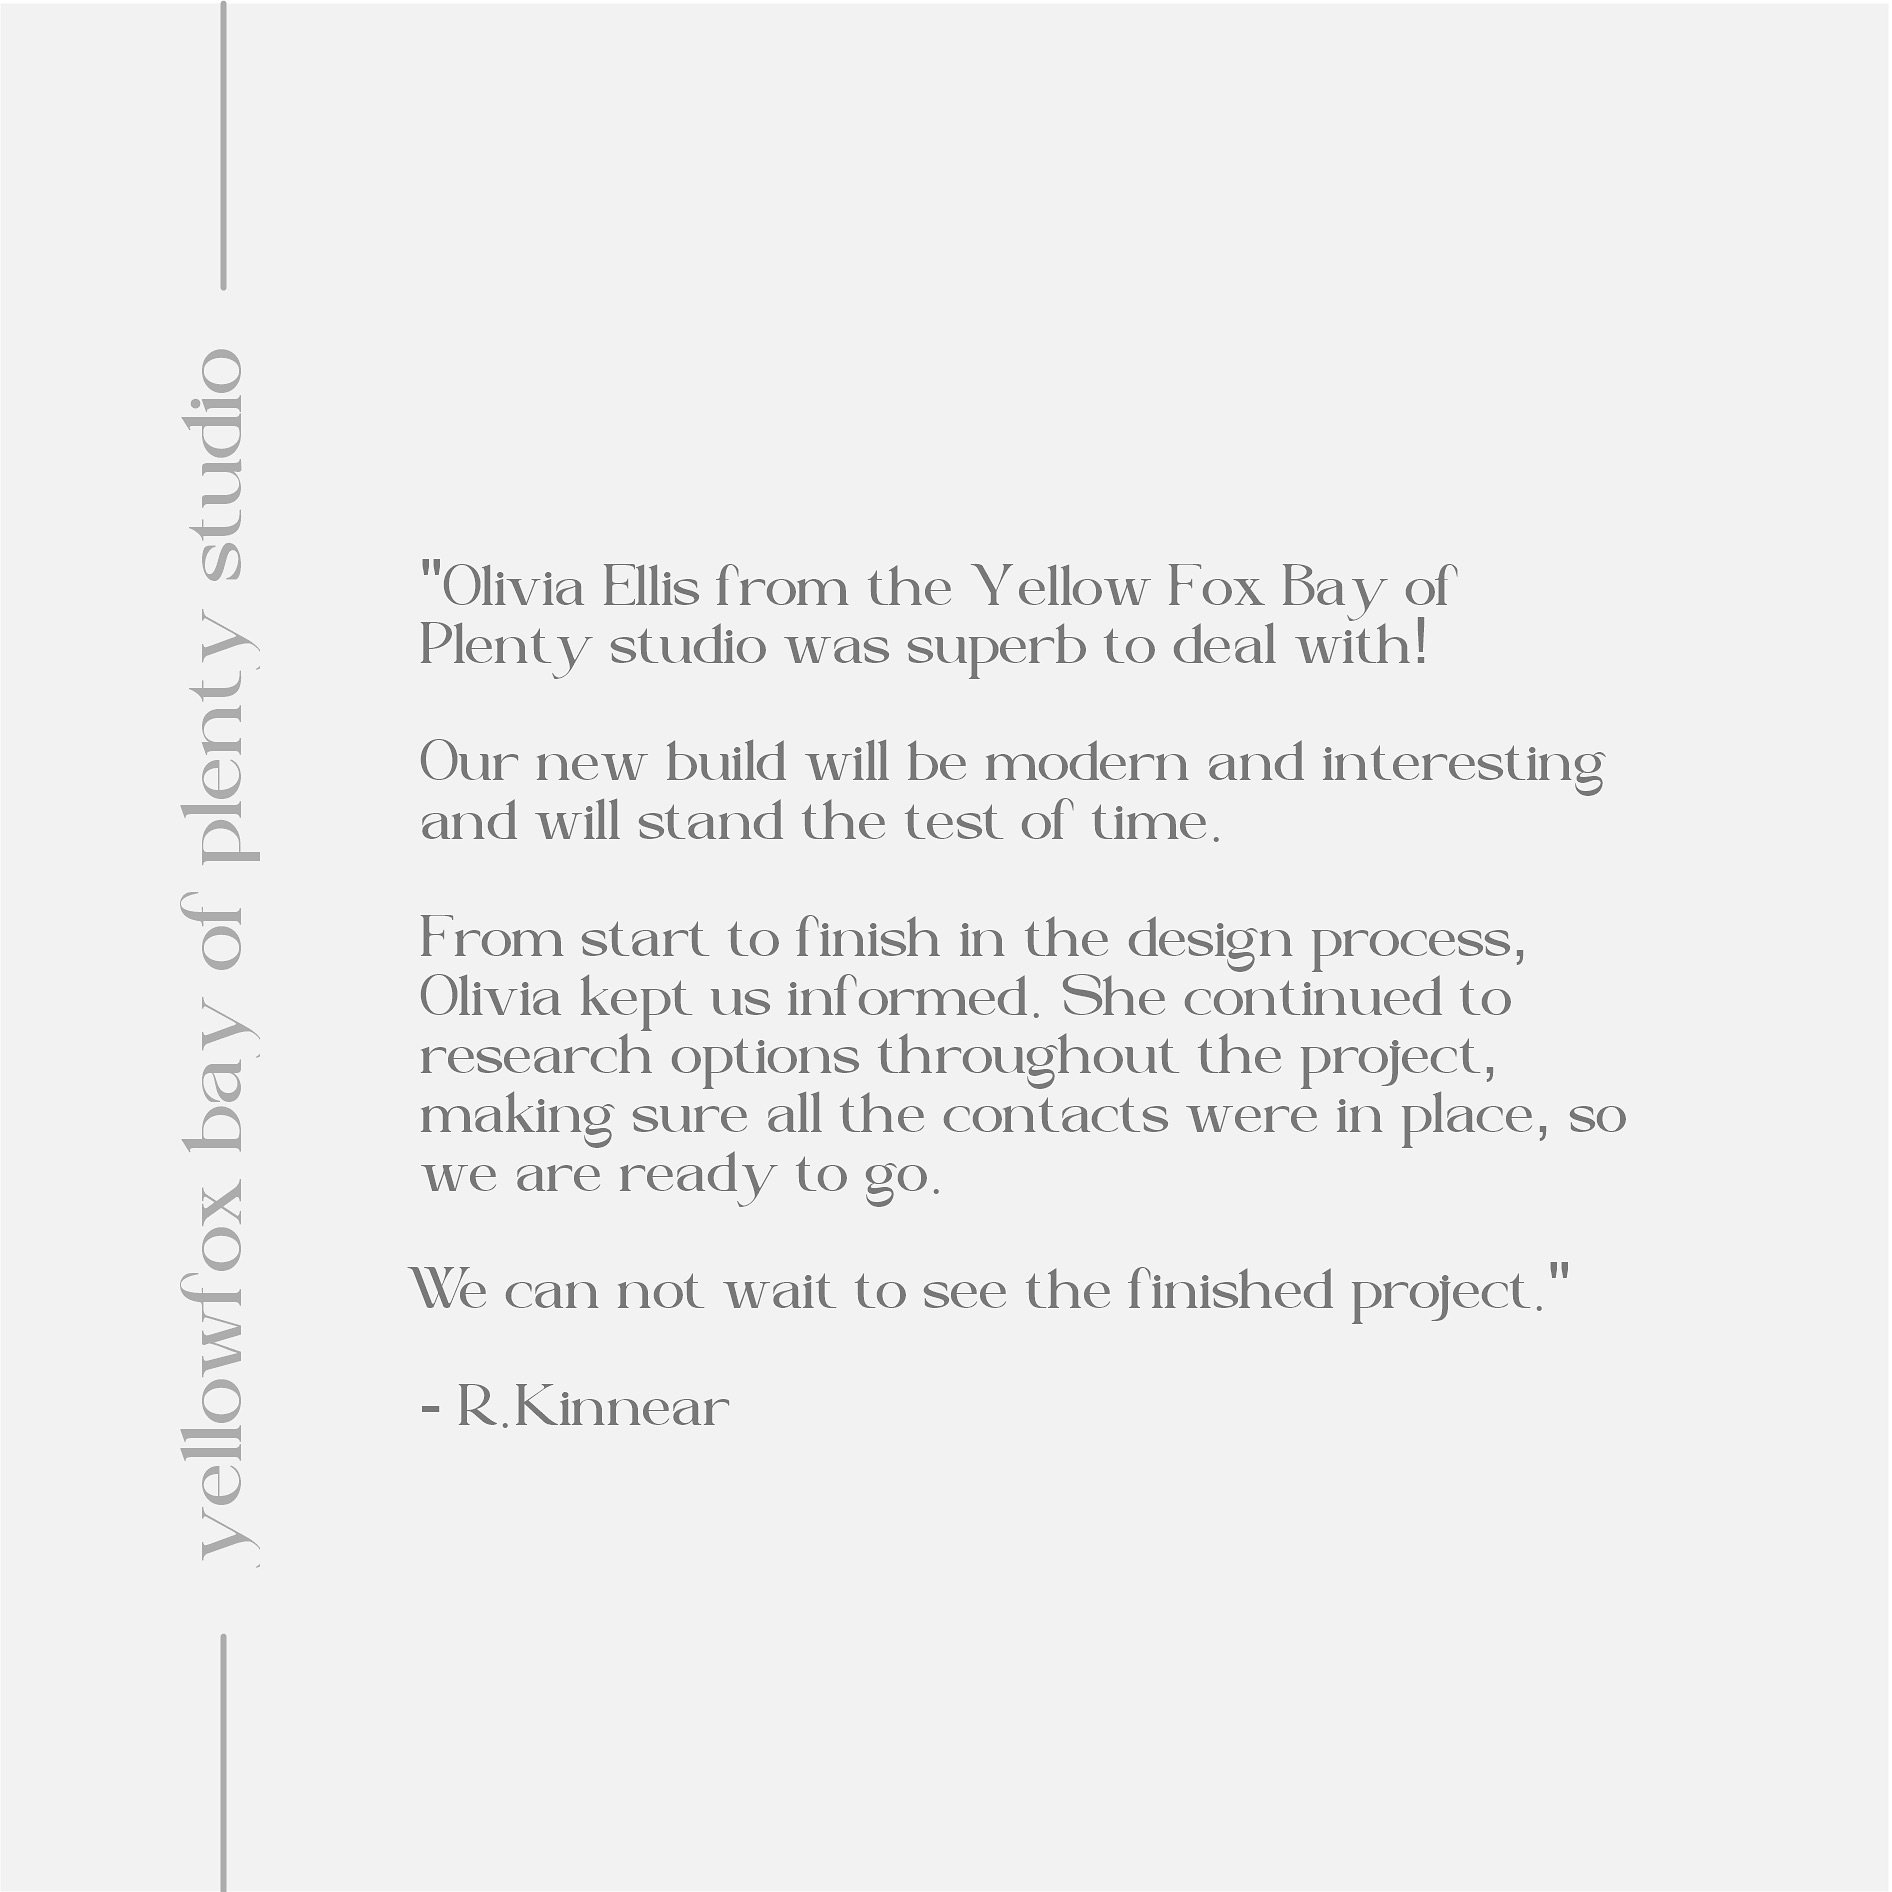 Thrilled to share the words of our delighted client who worked with our Yellowfox Bay of Plenty studio! 🌟

Their testimonial speaks volumes about the exceptional design experience we strive to deliver. Thank you for trusting us with your vision. 💛
